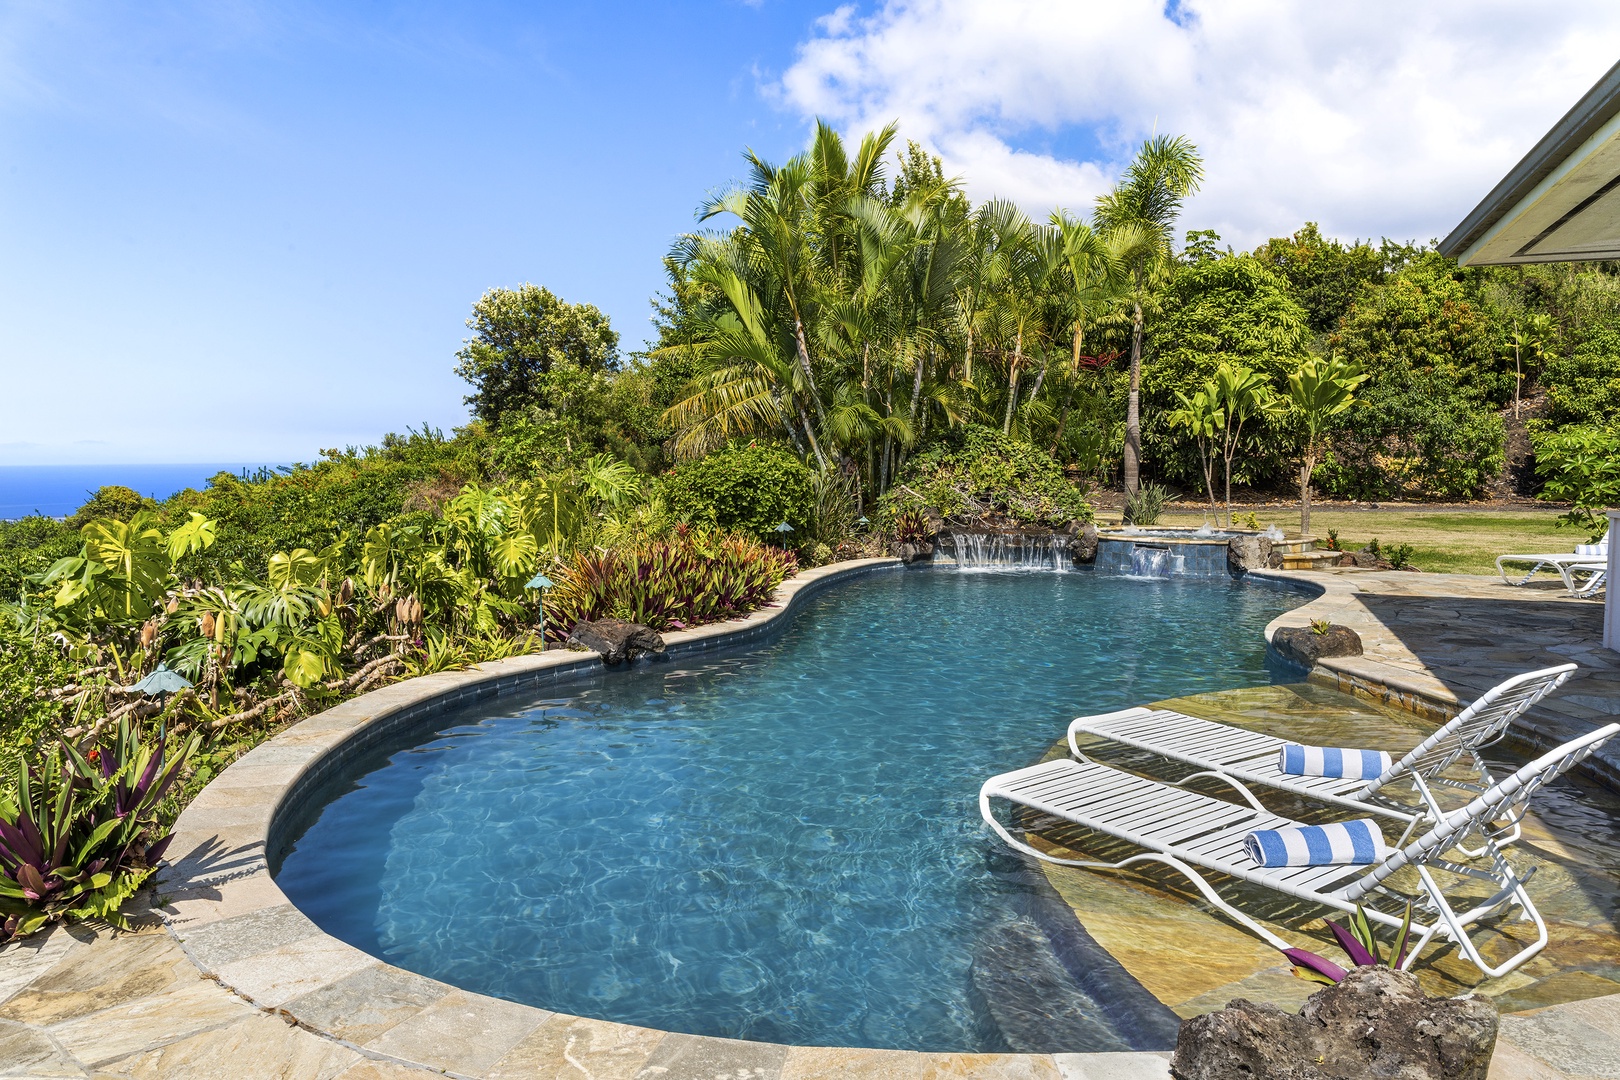 Kailua Kona Vacation Rentals, Piko Nani - Crystal clear waters for your enjoyment